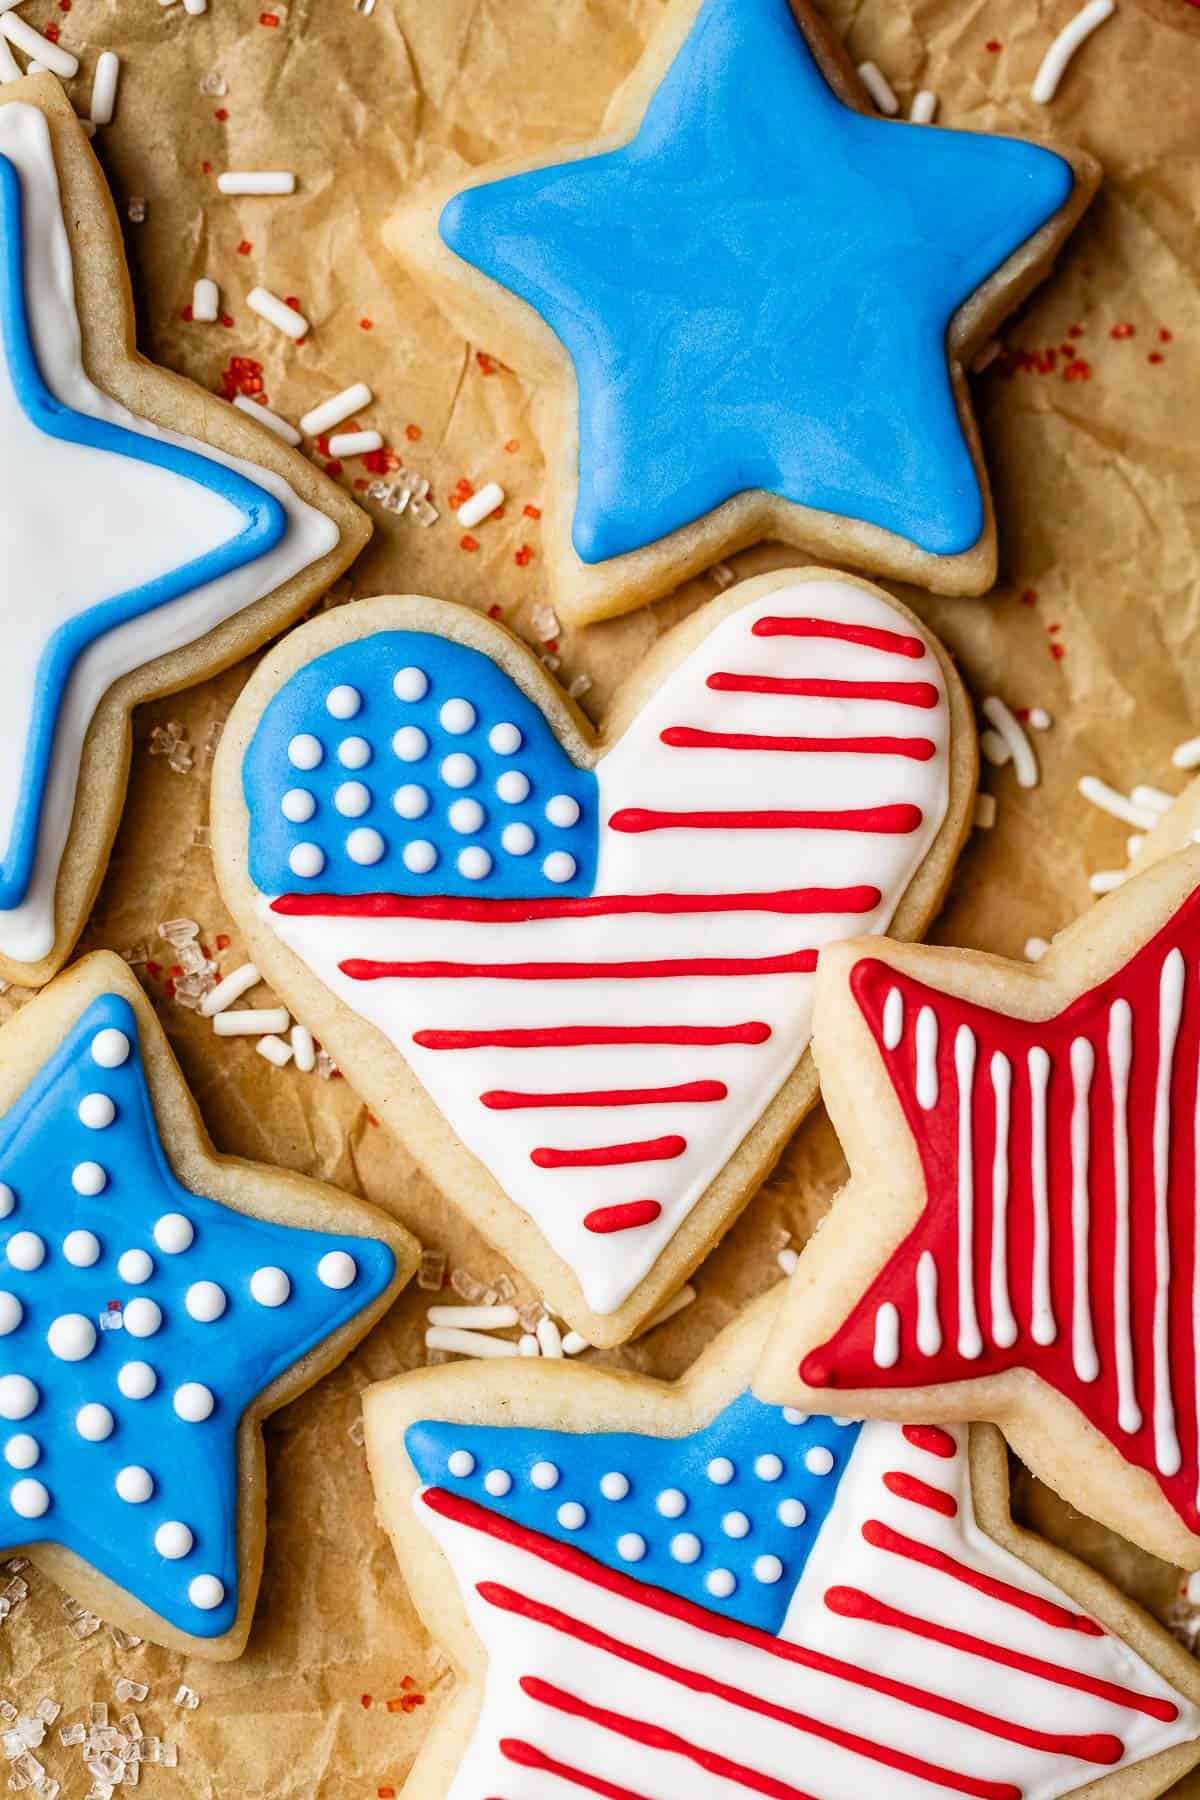 Sugar cookies decorated for July 4th including heart and stars with red, white, and blue icing.